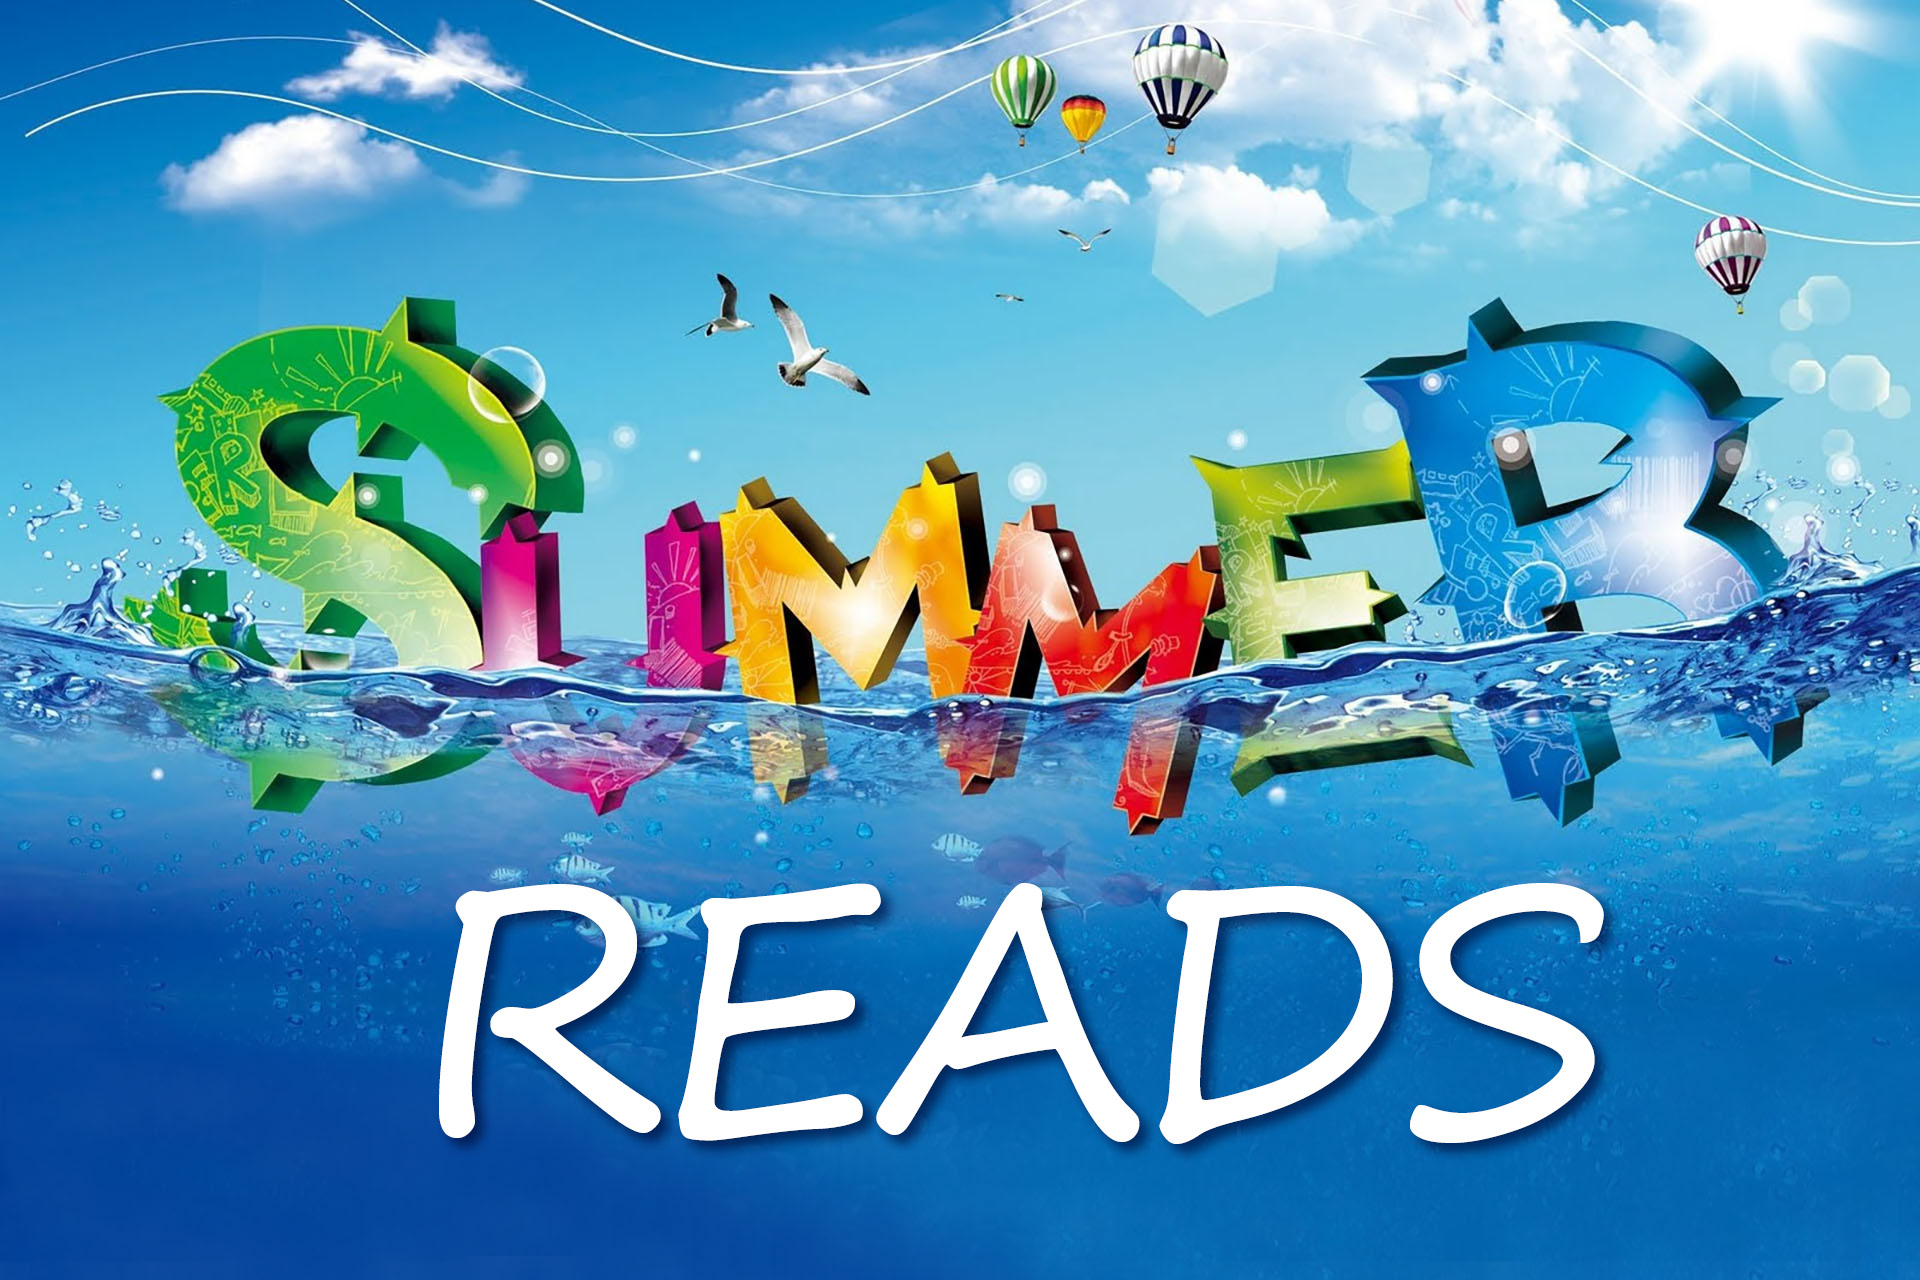 Summer reads - 'summer' letter floating on the sea with blue skies and hot air balloons